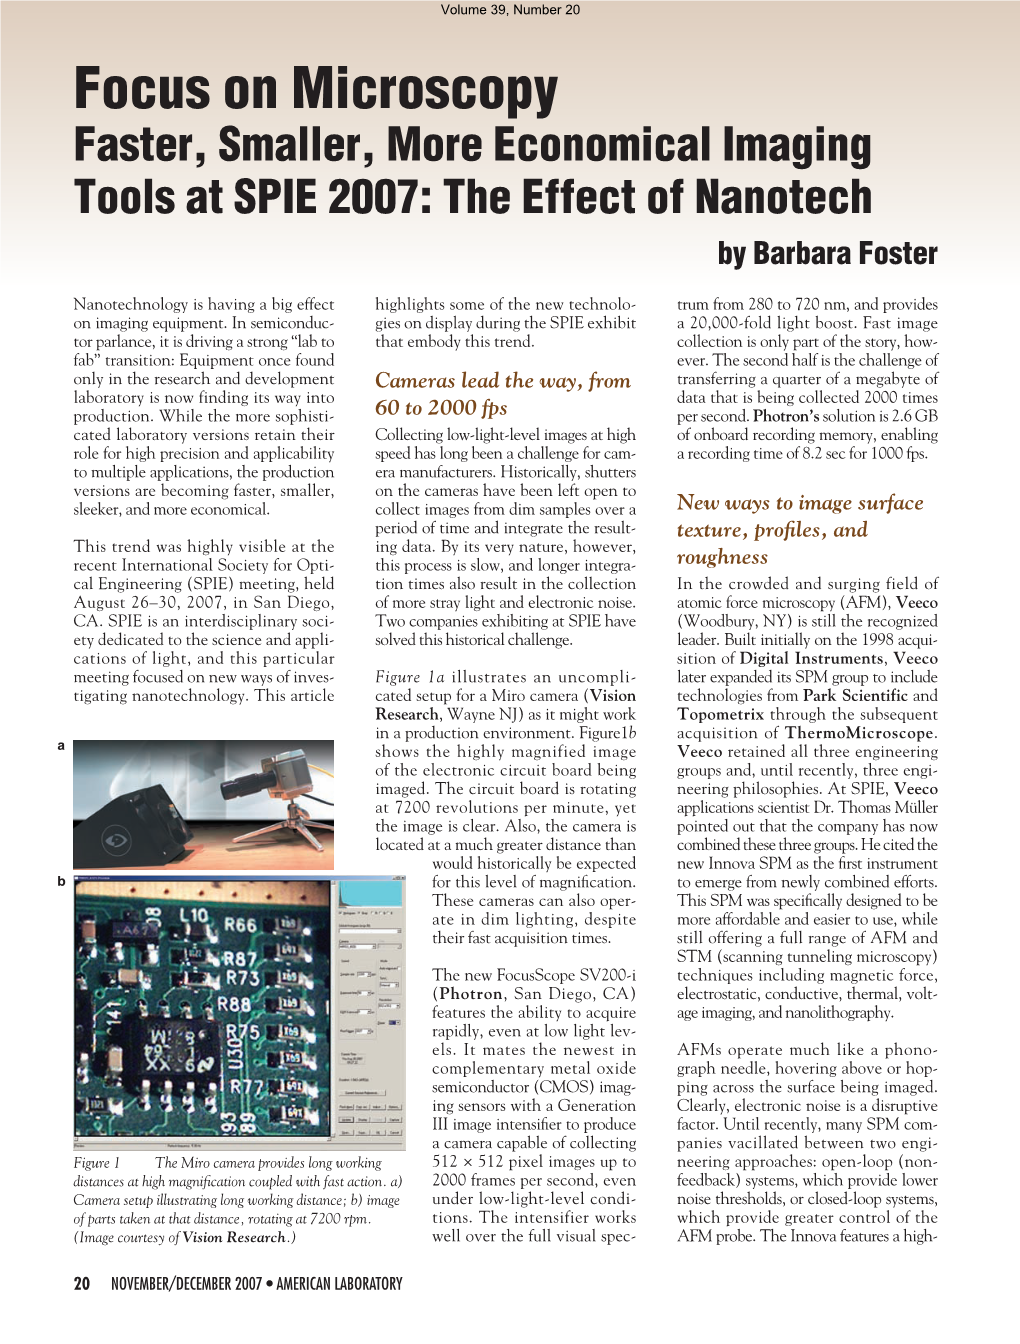 Focus on Microscopy Faster, Smaller, More Economical Imaging Tools at SPIE 2007: the Effect of Nanotech by Barbara Foster